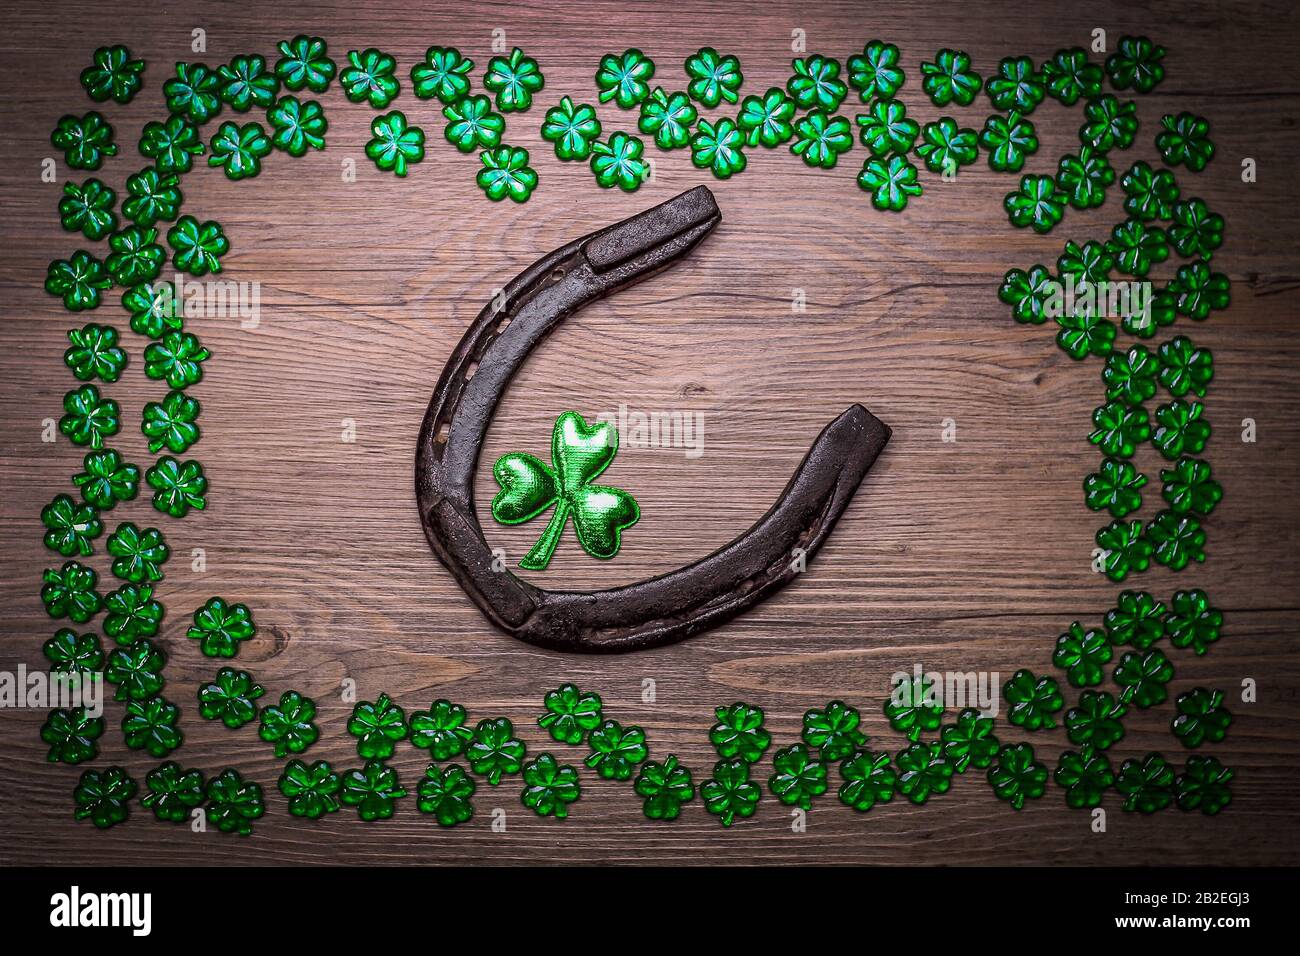 Background with rusty horseshoe, shamrocks over rustic wood. St.Patrick's day holiday symbol. Lucky charms. Top view, copy space. Stock Photo